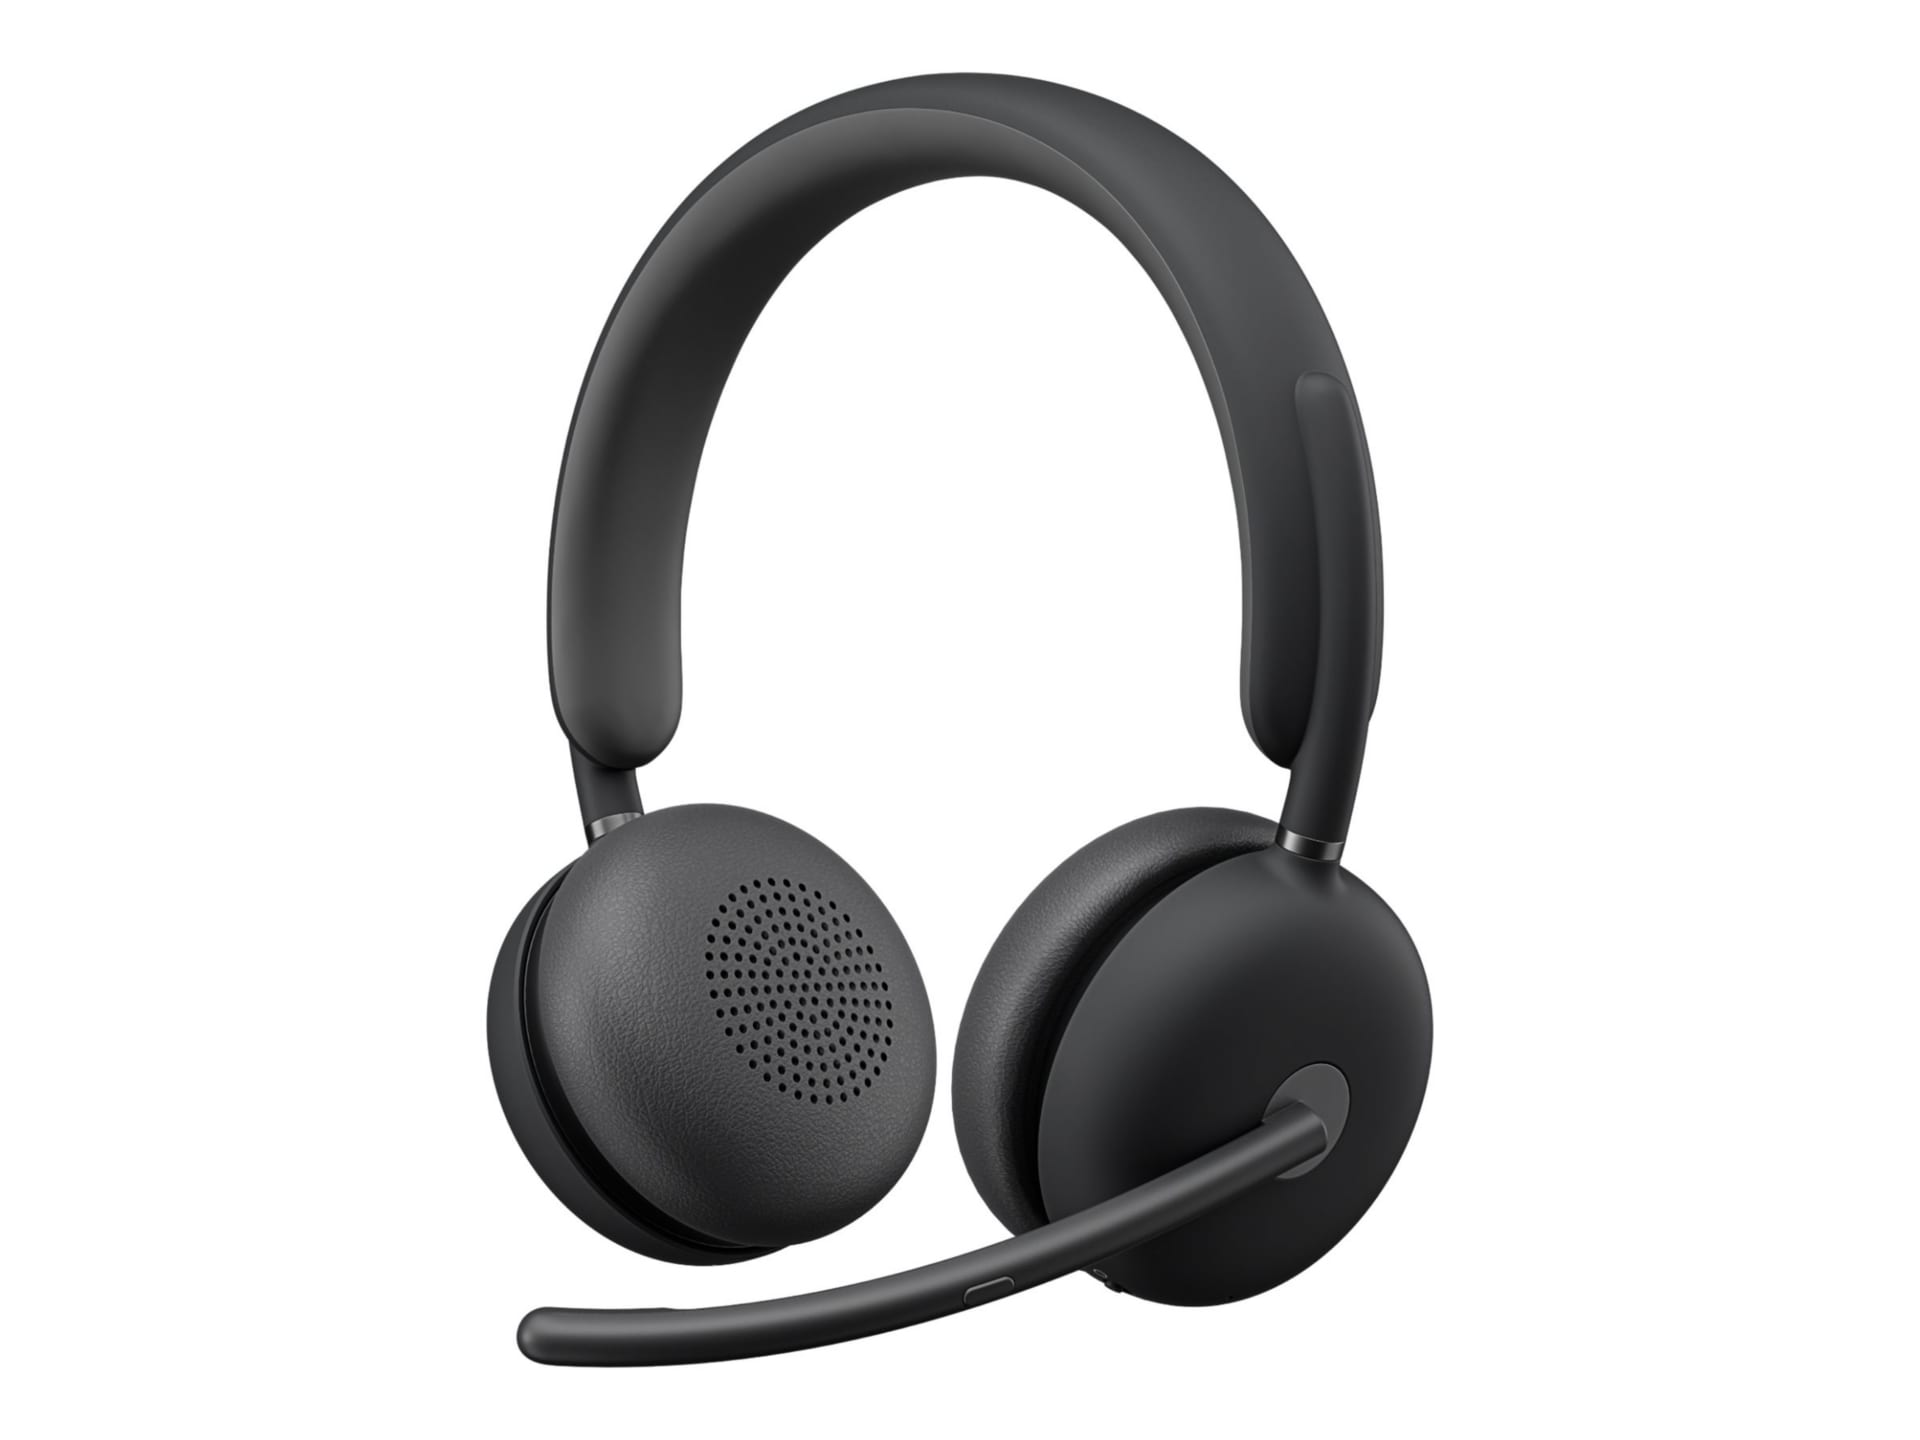 Logitech Zone 950 Premium Noise Canceling Headset with Hybrid ANC, Certifie